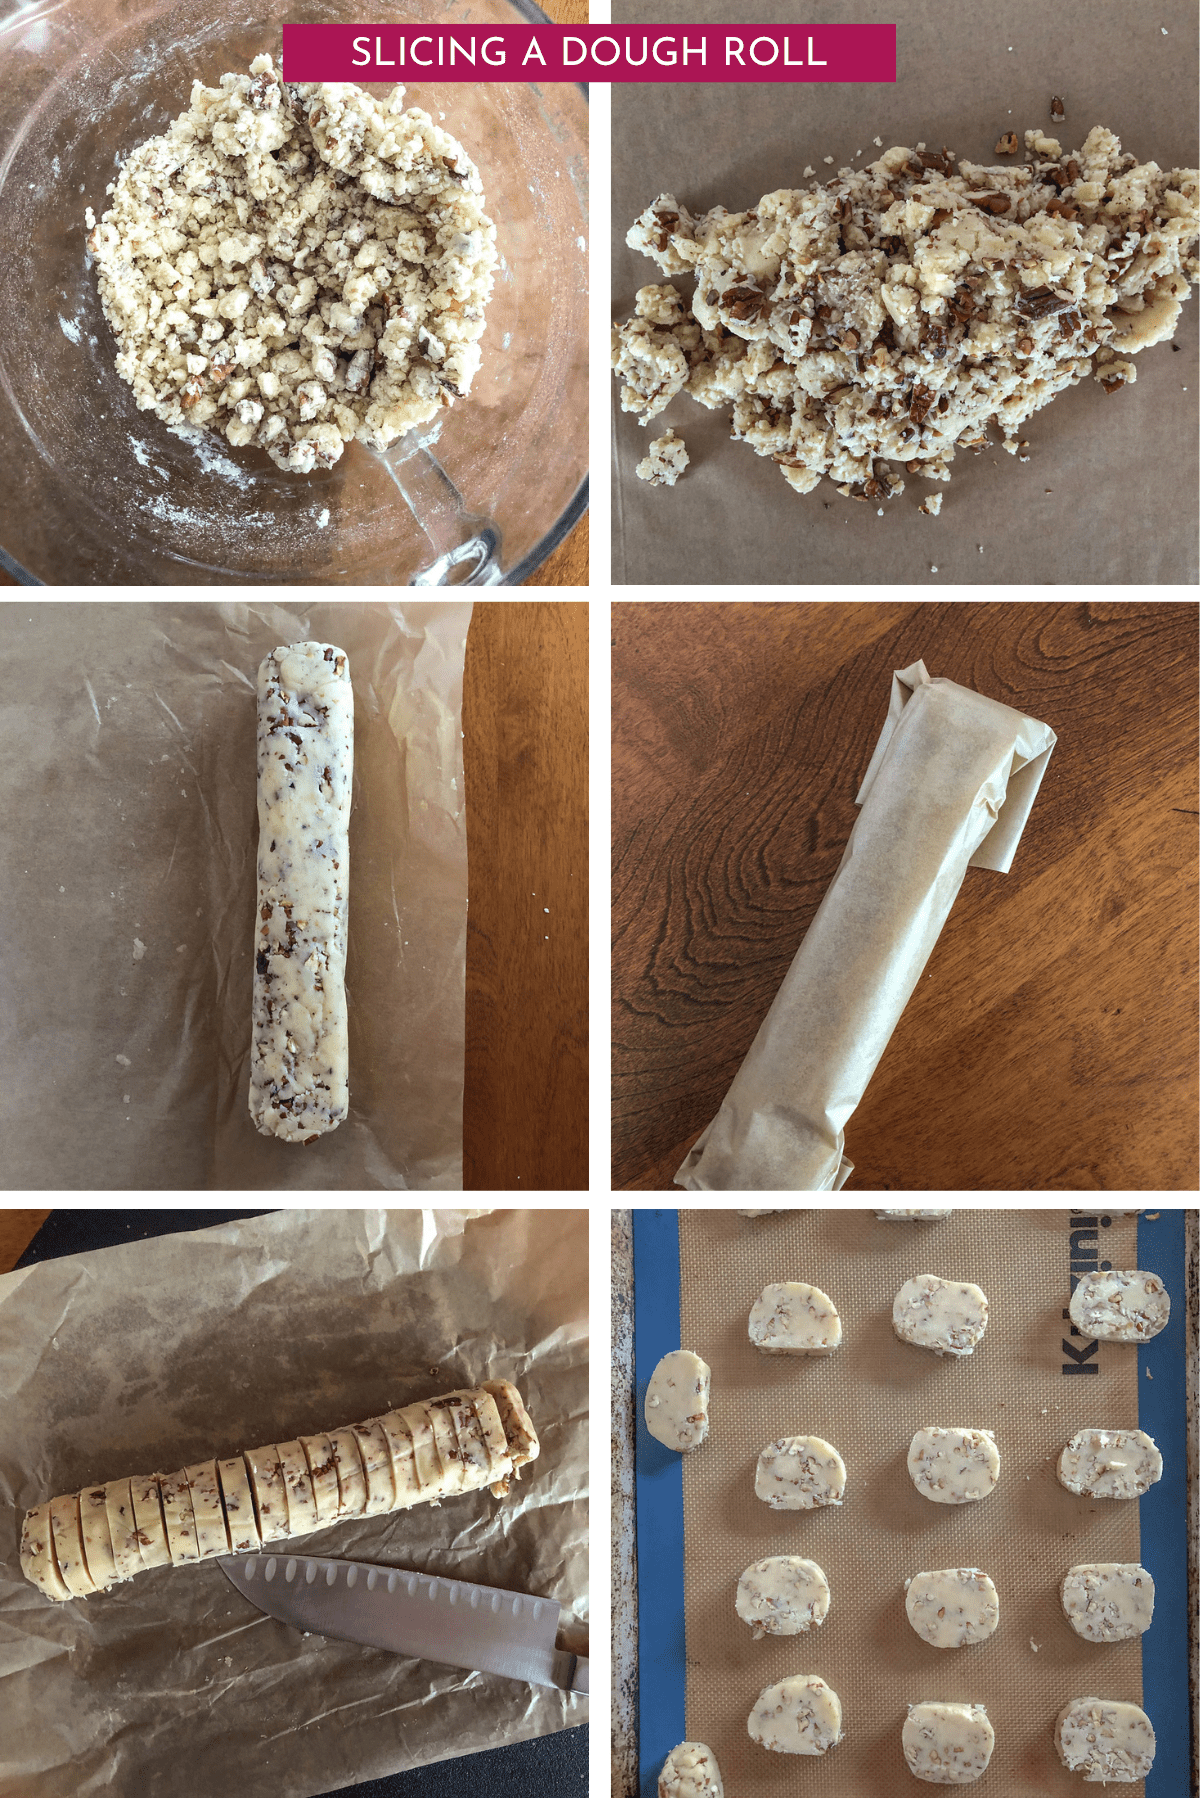 Rolling and slicing a dough log for pecan shortbread cookies.